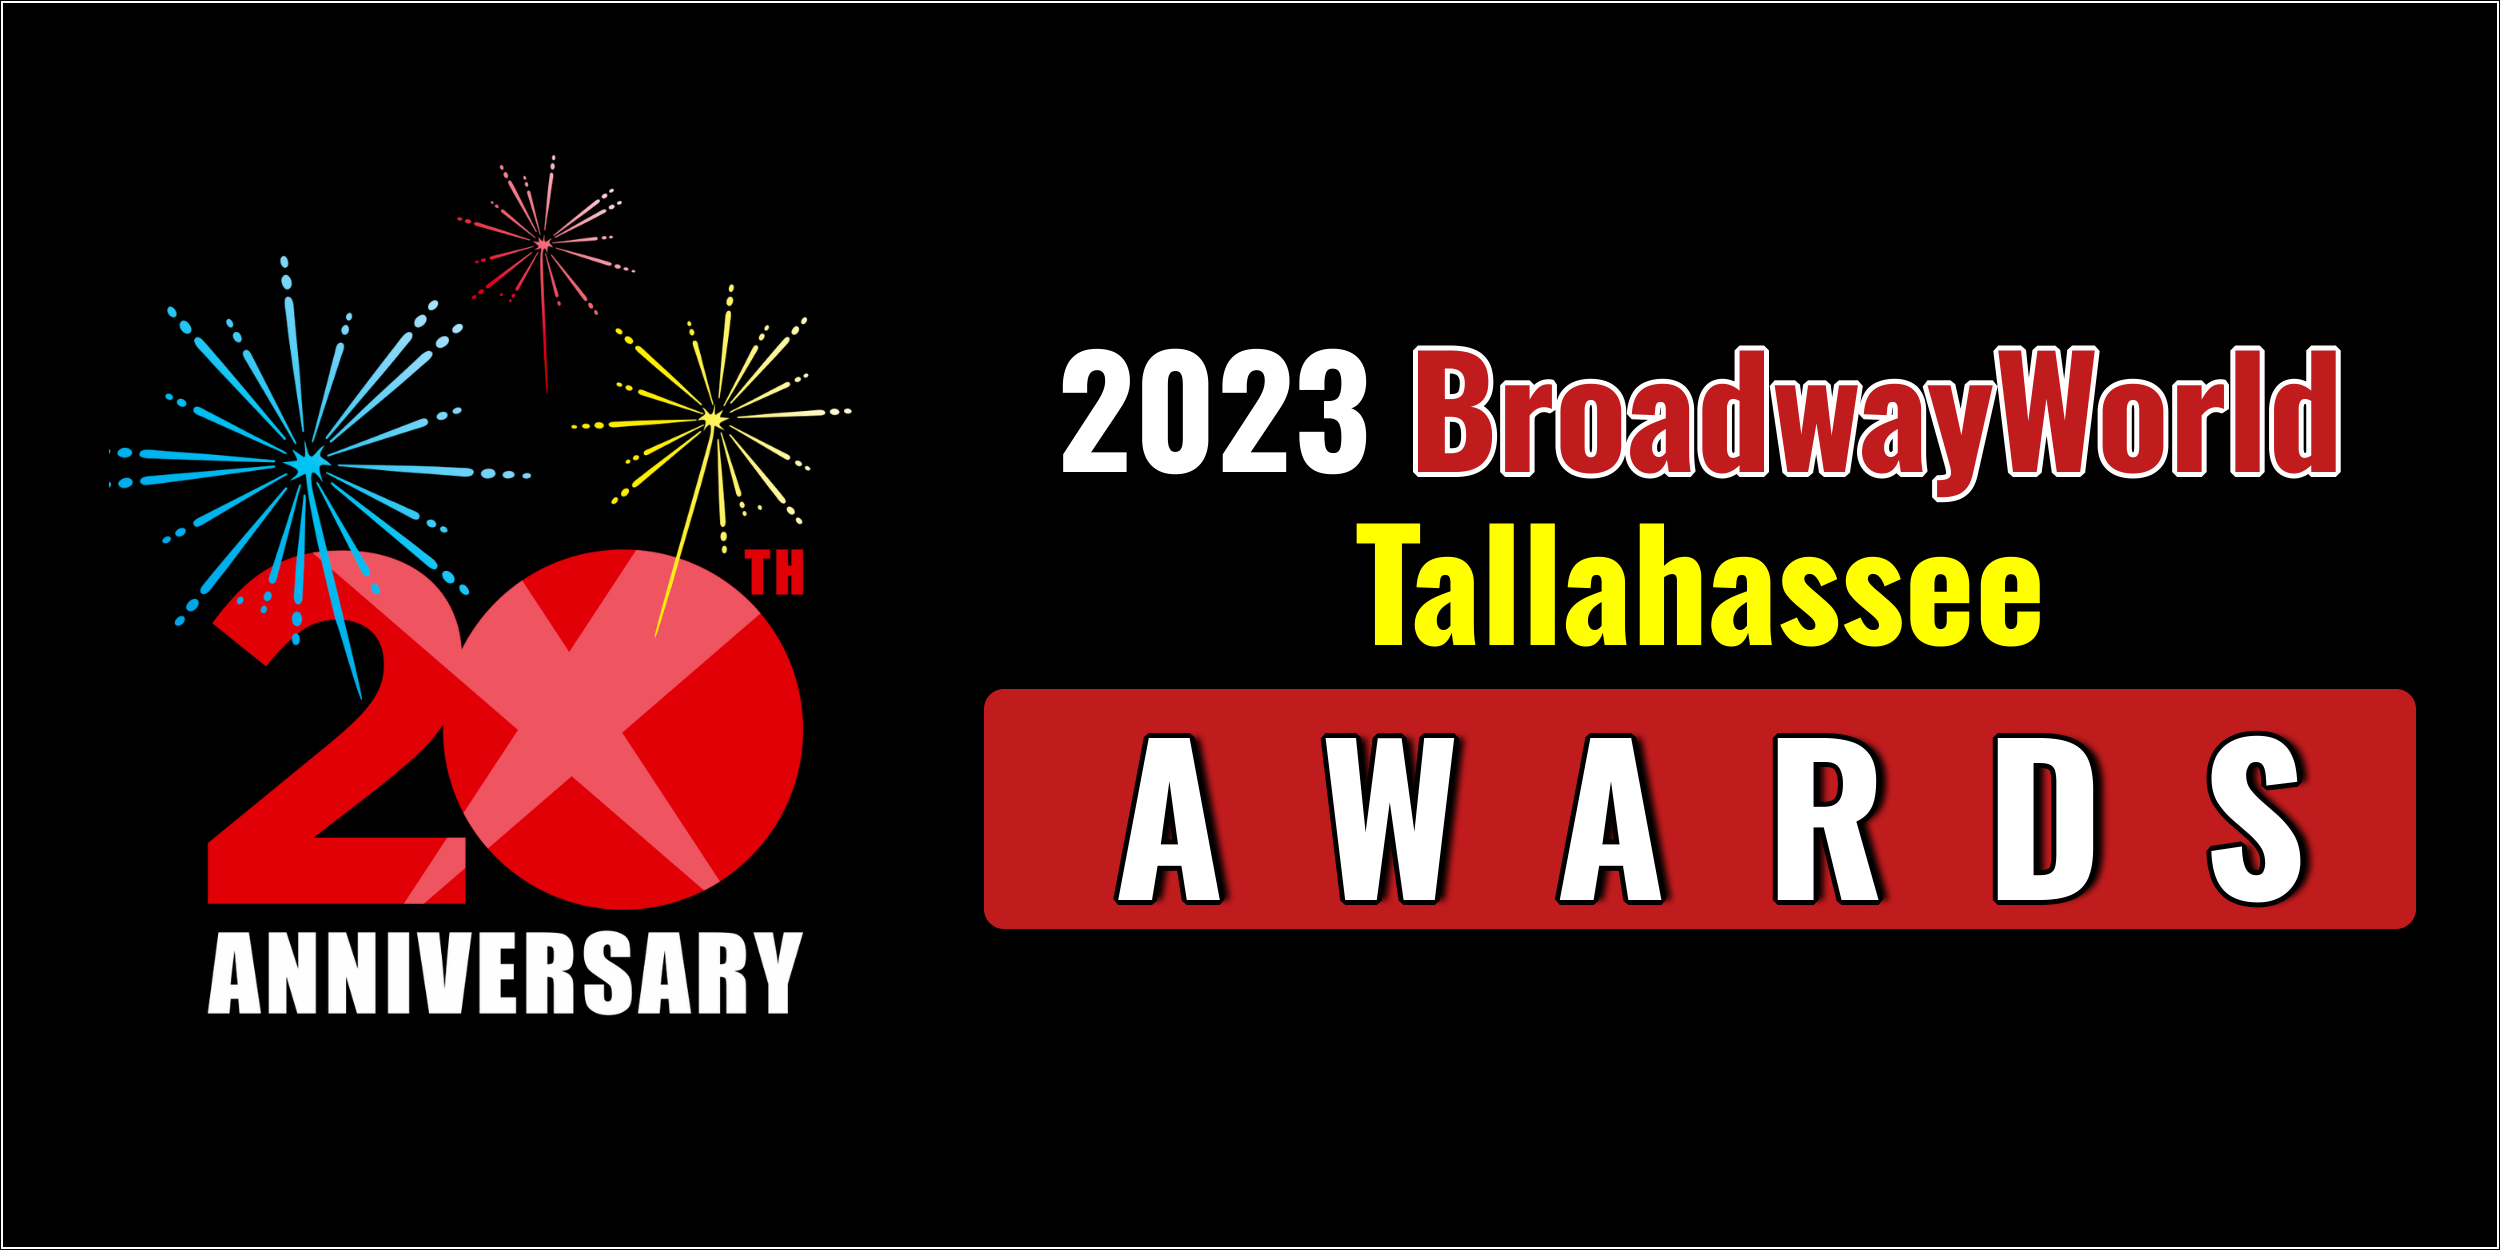 Latest Standings Announced For The 2023 BroadwayWorld Tallahassee Awards; THE MERRY WIVES OF WINDSOR Leads Best Play! 